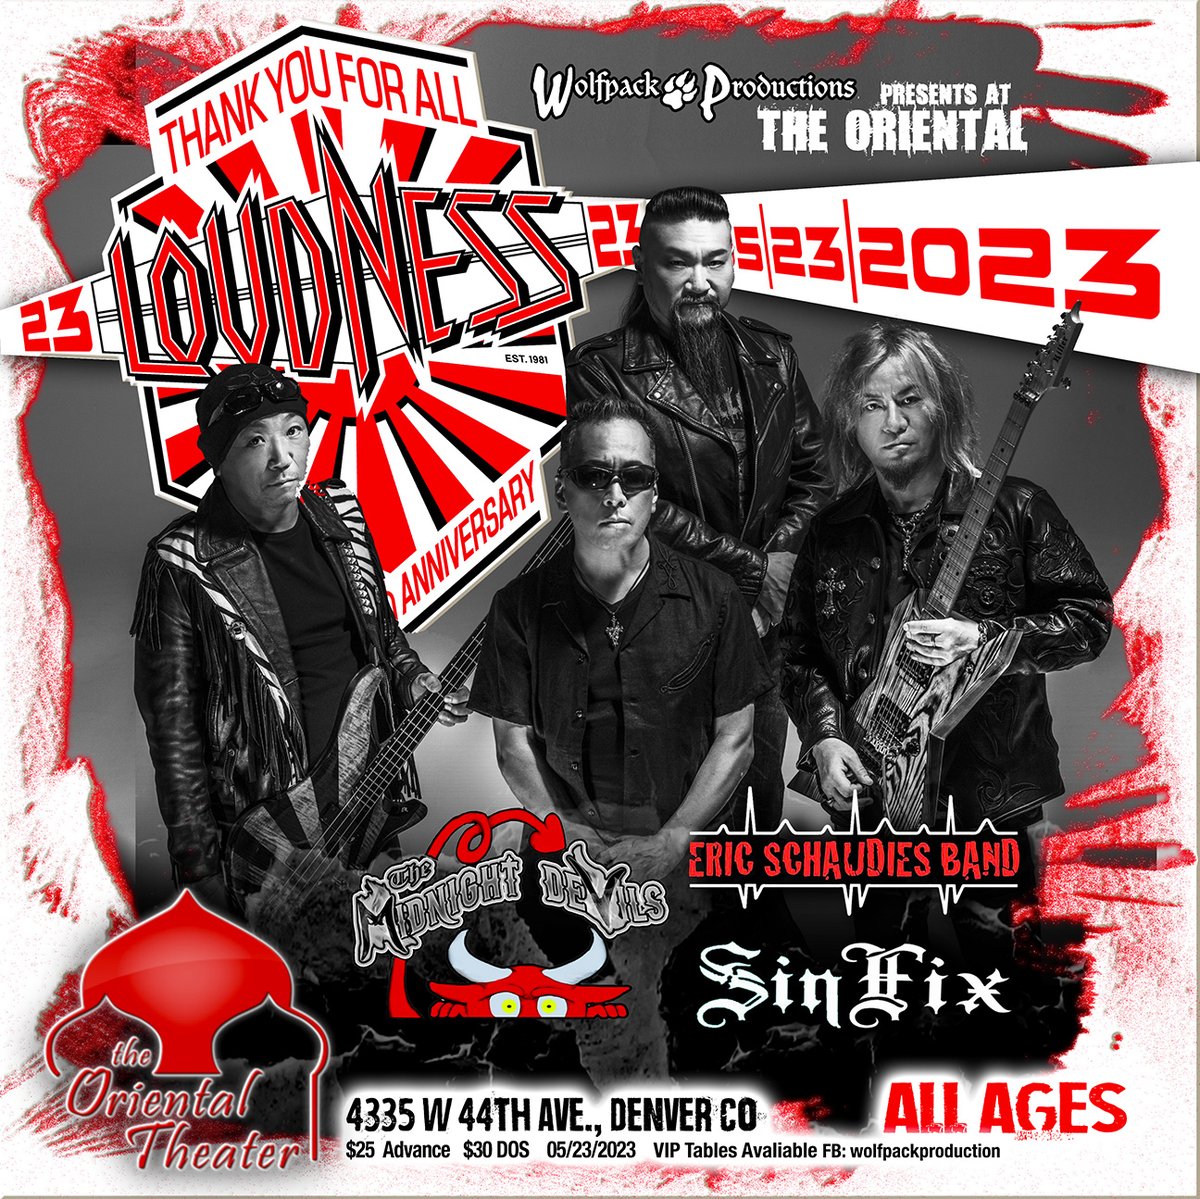 Just Announced! @LOUDNESS_INFO @theorientalthea #Denver CO / May 23 2023 7:00pm with @MidnightDevils & More! Grab #tickets tickets.holdmyticket.com/tickets/398895 & tables quick as not to miss this #RocknRoll #CrazyNight by @WolfpackProd